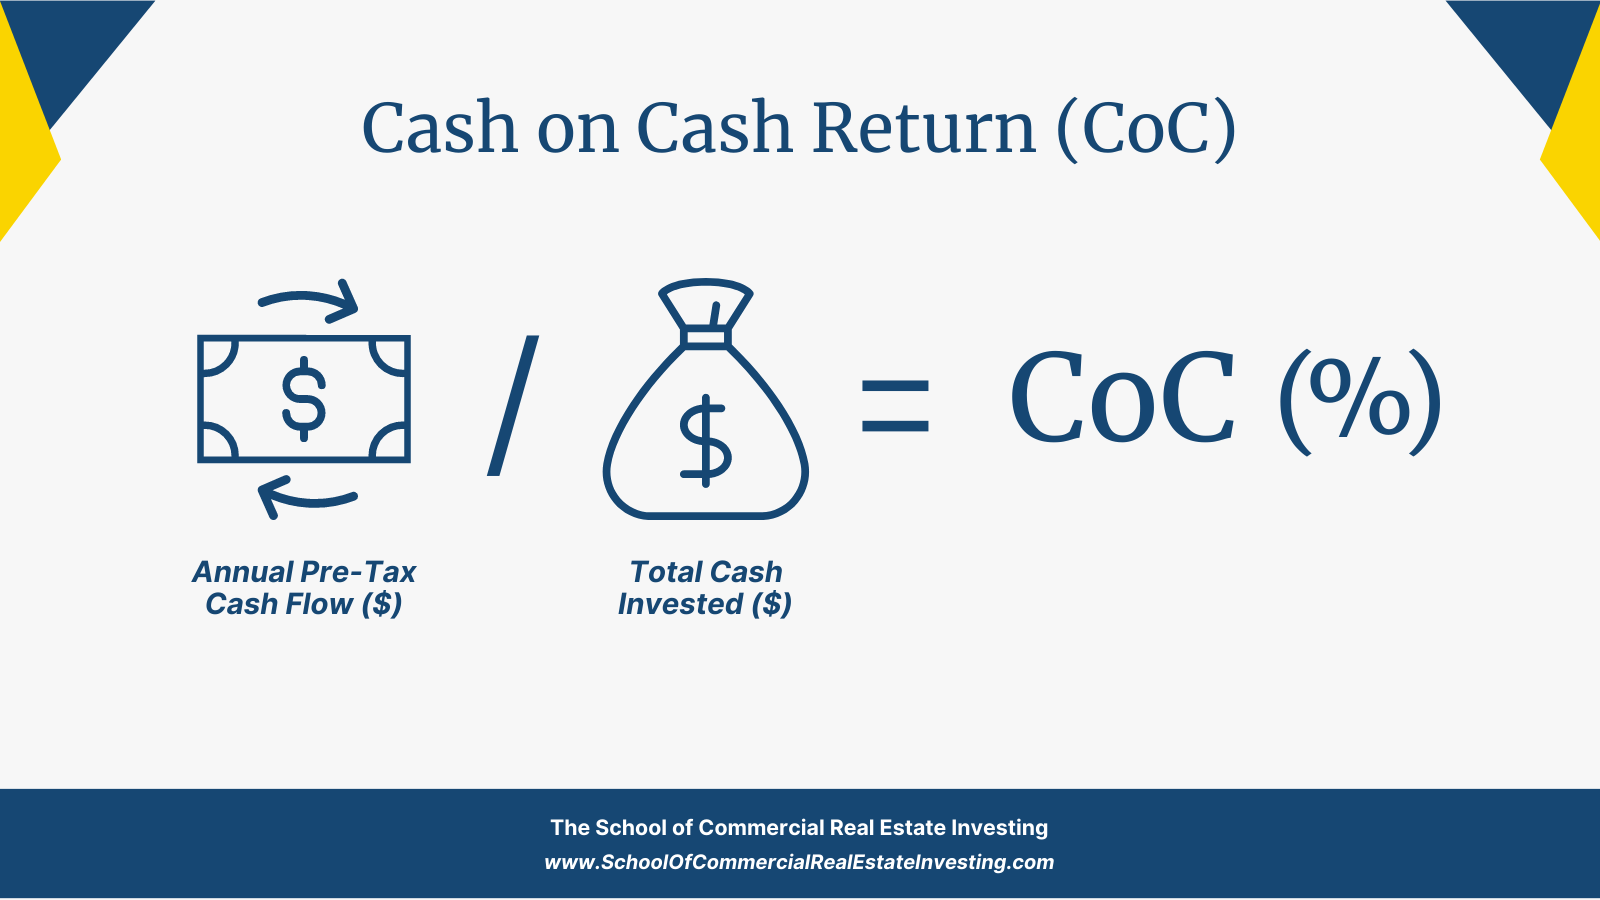 Calculate the Cash on Cash Return (CoC) by dividing the Annual Pre-Tax Cash Flow by the Total Cash Invested.